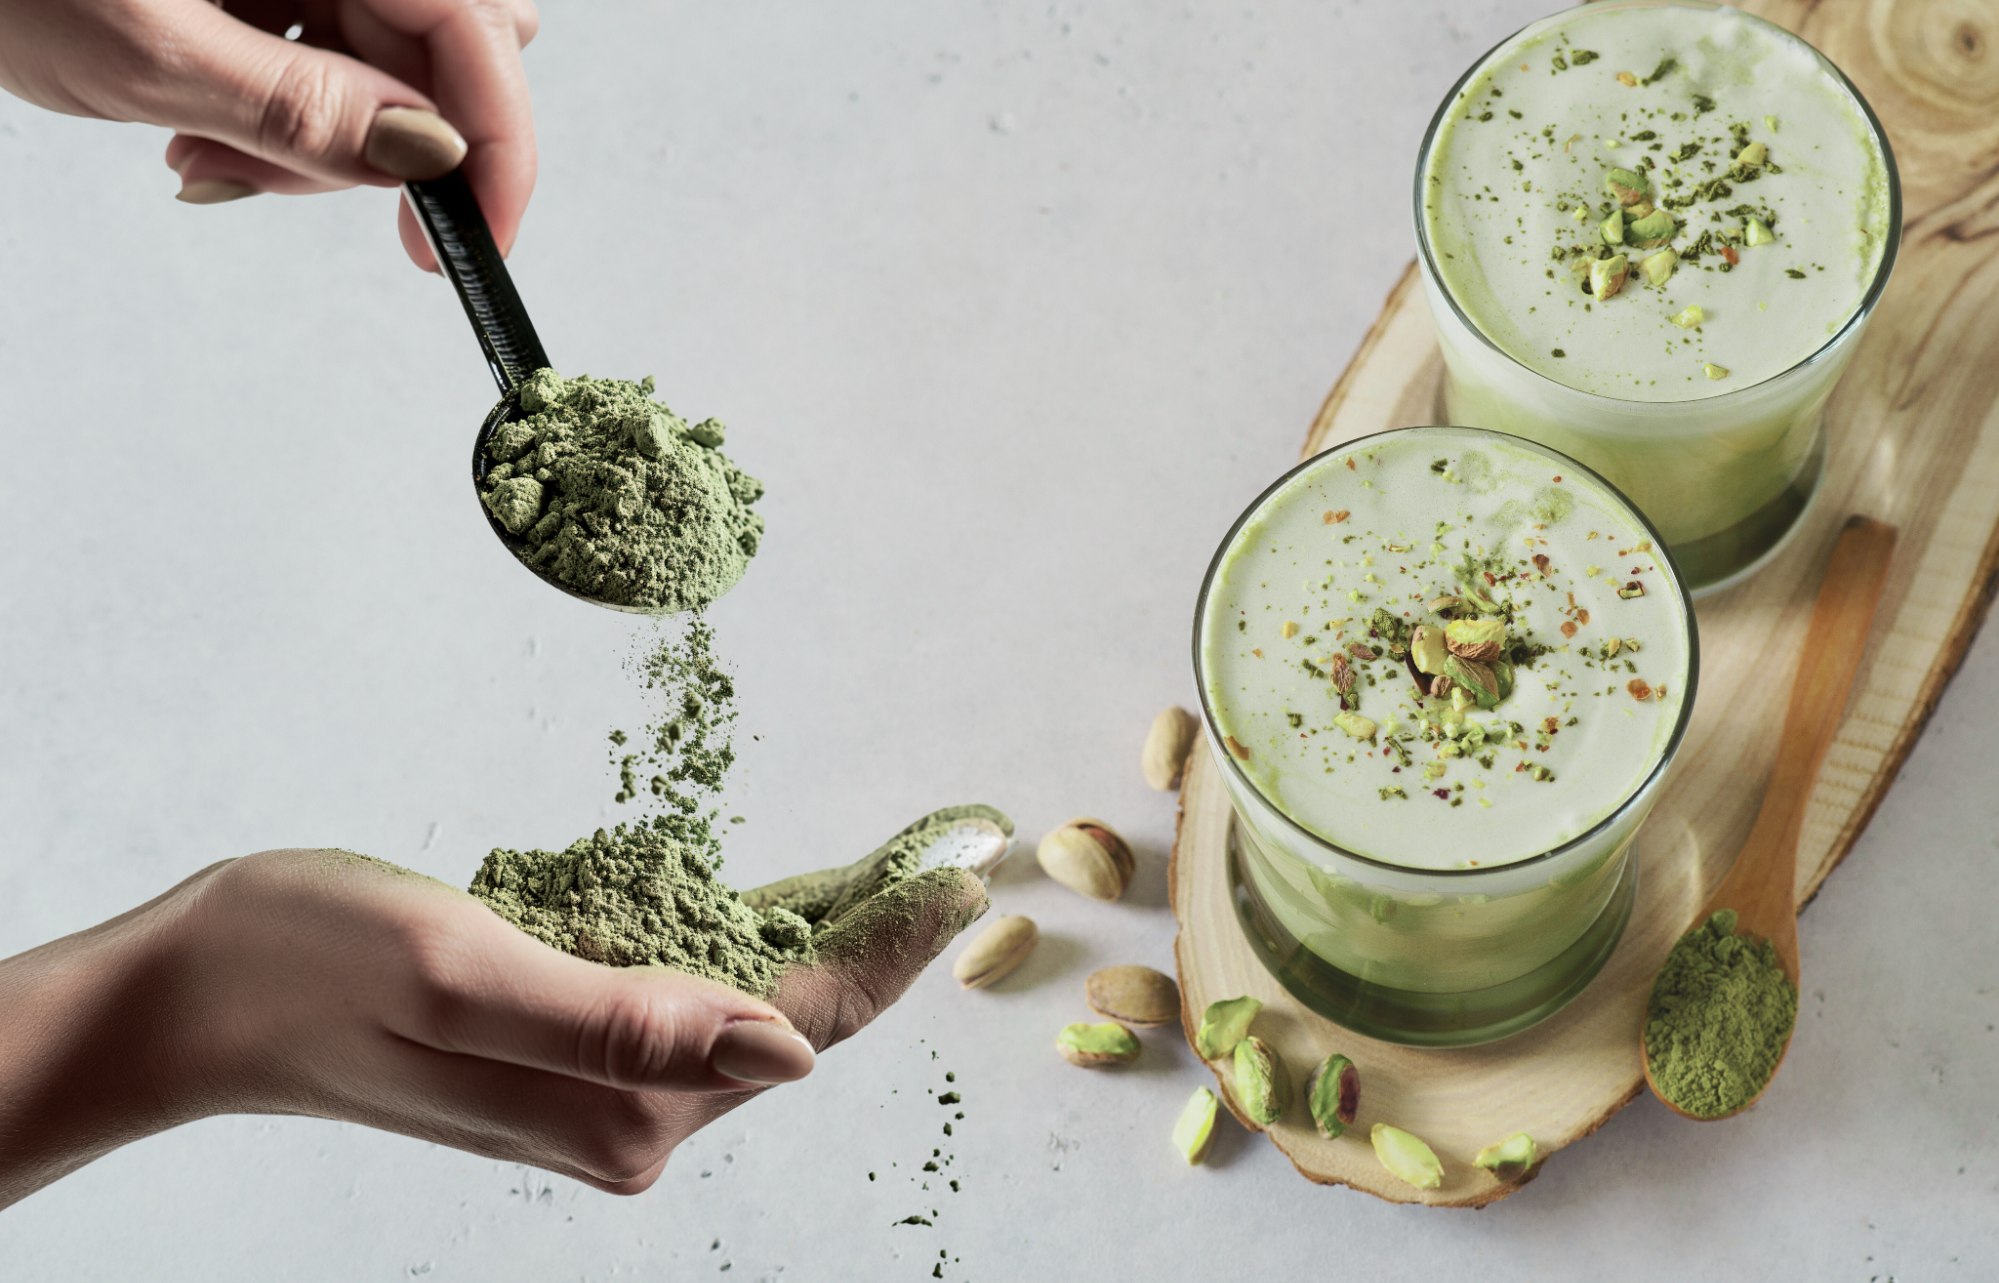 On the kitchen counter sit two glasses of green smoothie, while a hand holds a spoonful of greens powder.